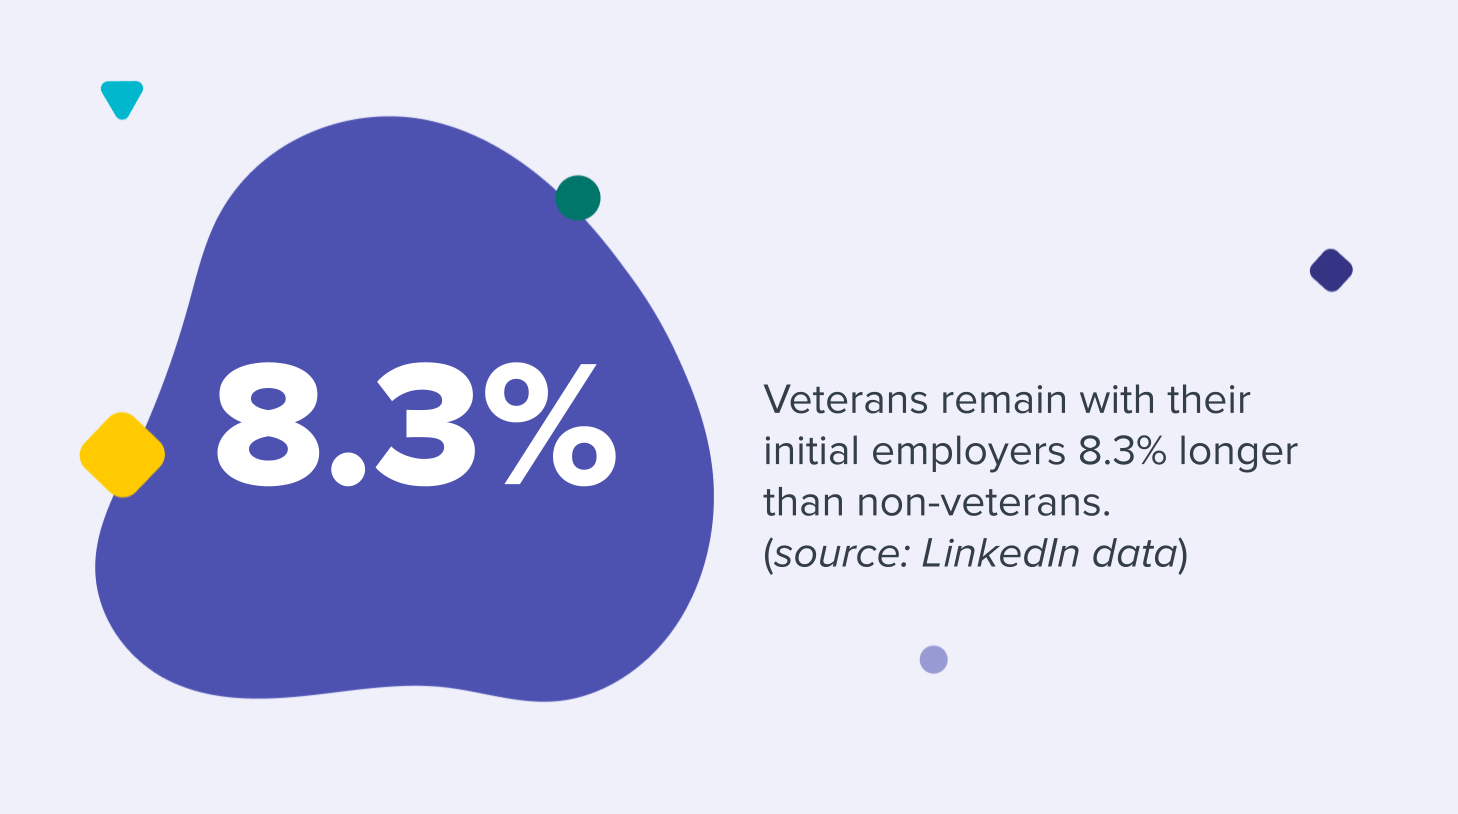 Veterans remain with their initial employers 8.3% longer than non-veterans. 